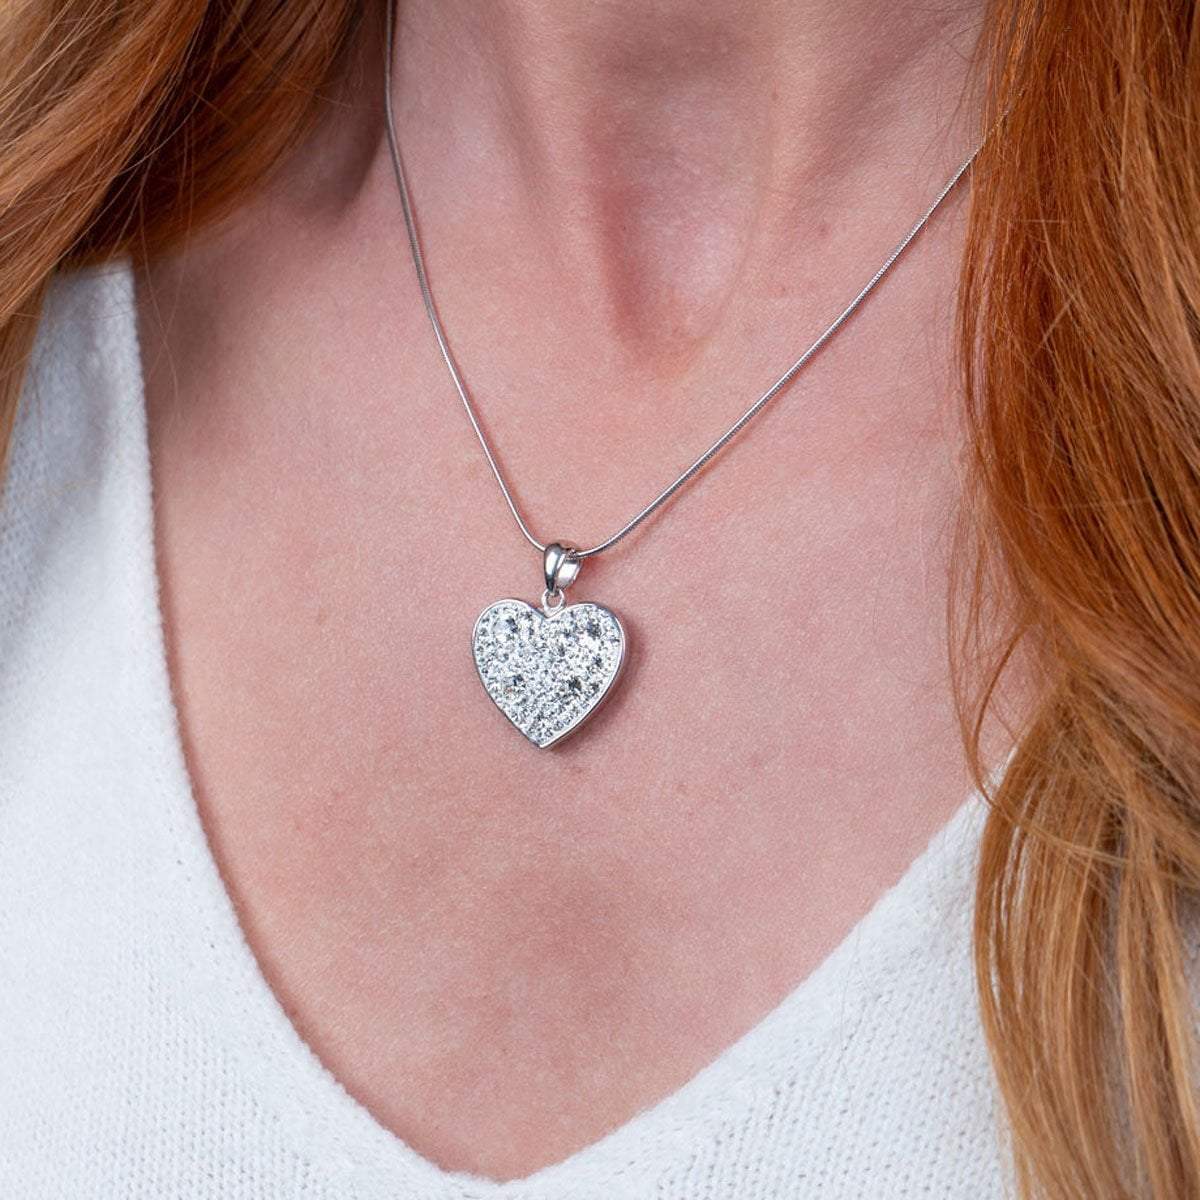 Swarovski Crystal Heart Pendant in Sterling Silver Pendant + Chain Crystal Collection Roma Designer Jewelry